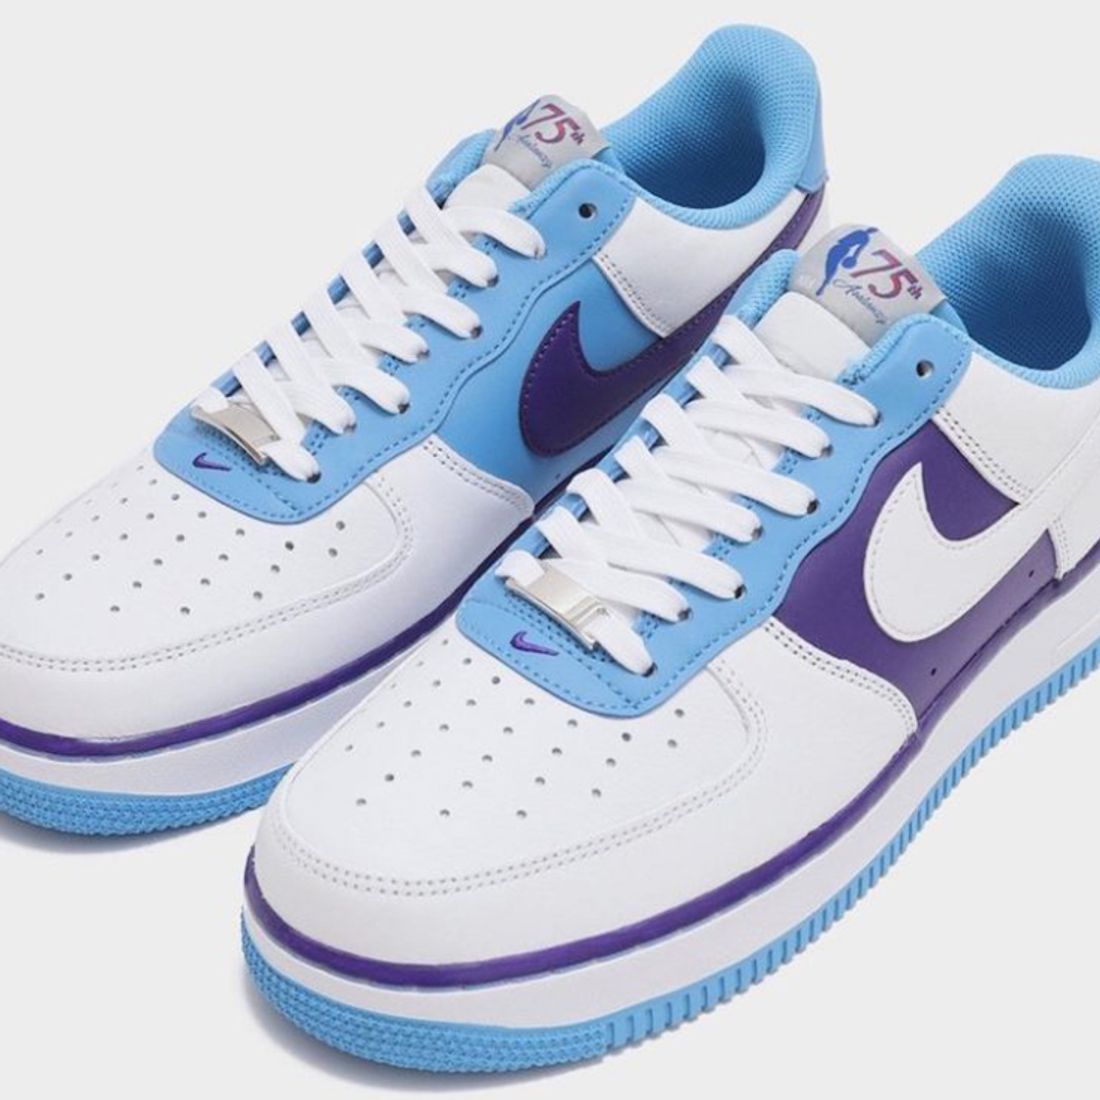 Air Force 1 NBA 75th Anniversary Lakers On Feet Sneaker Review